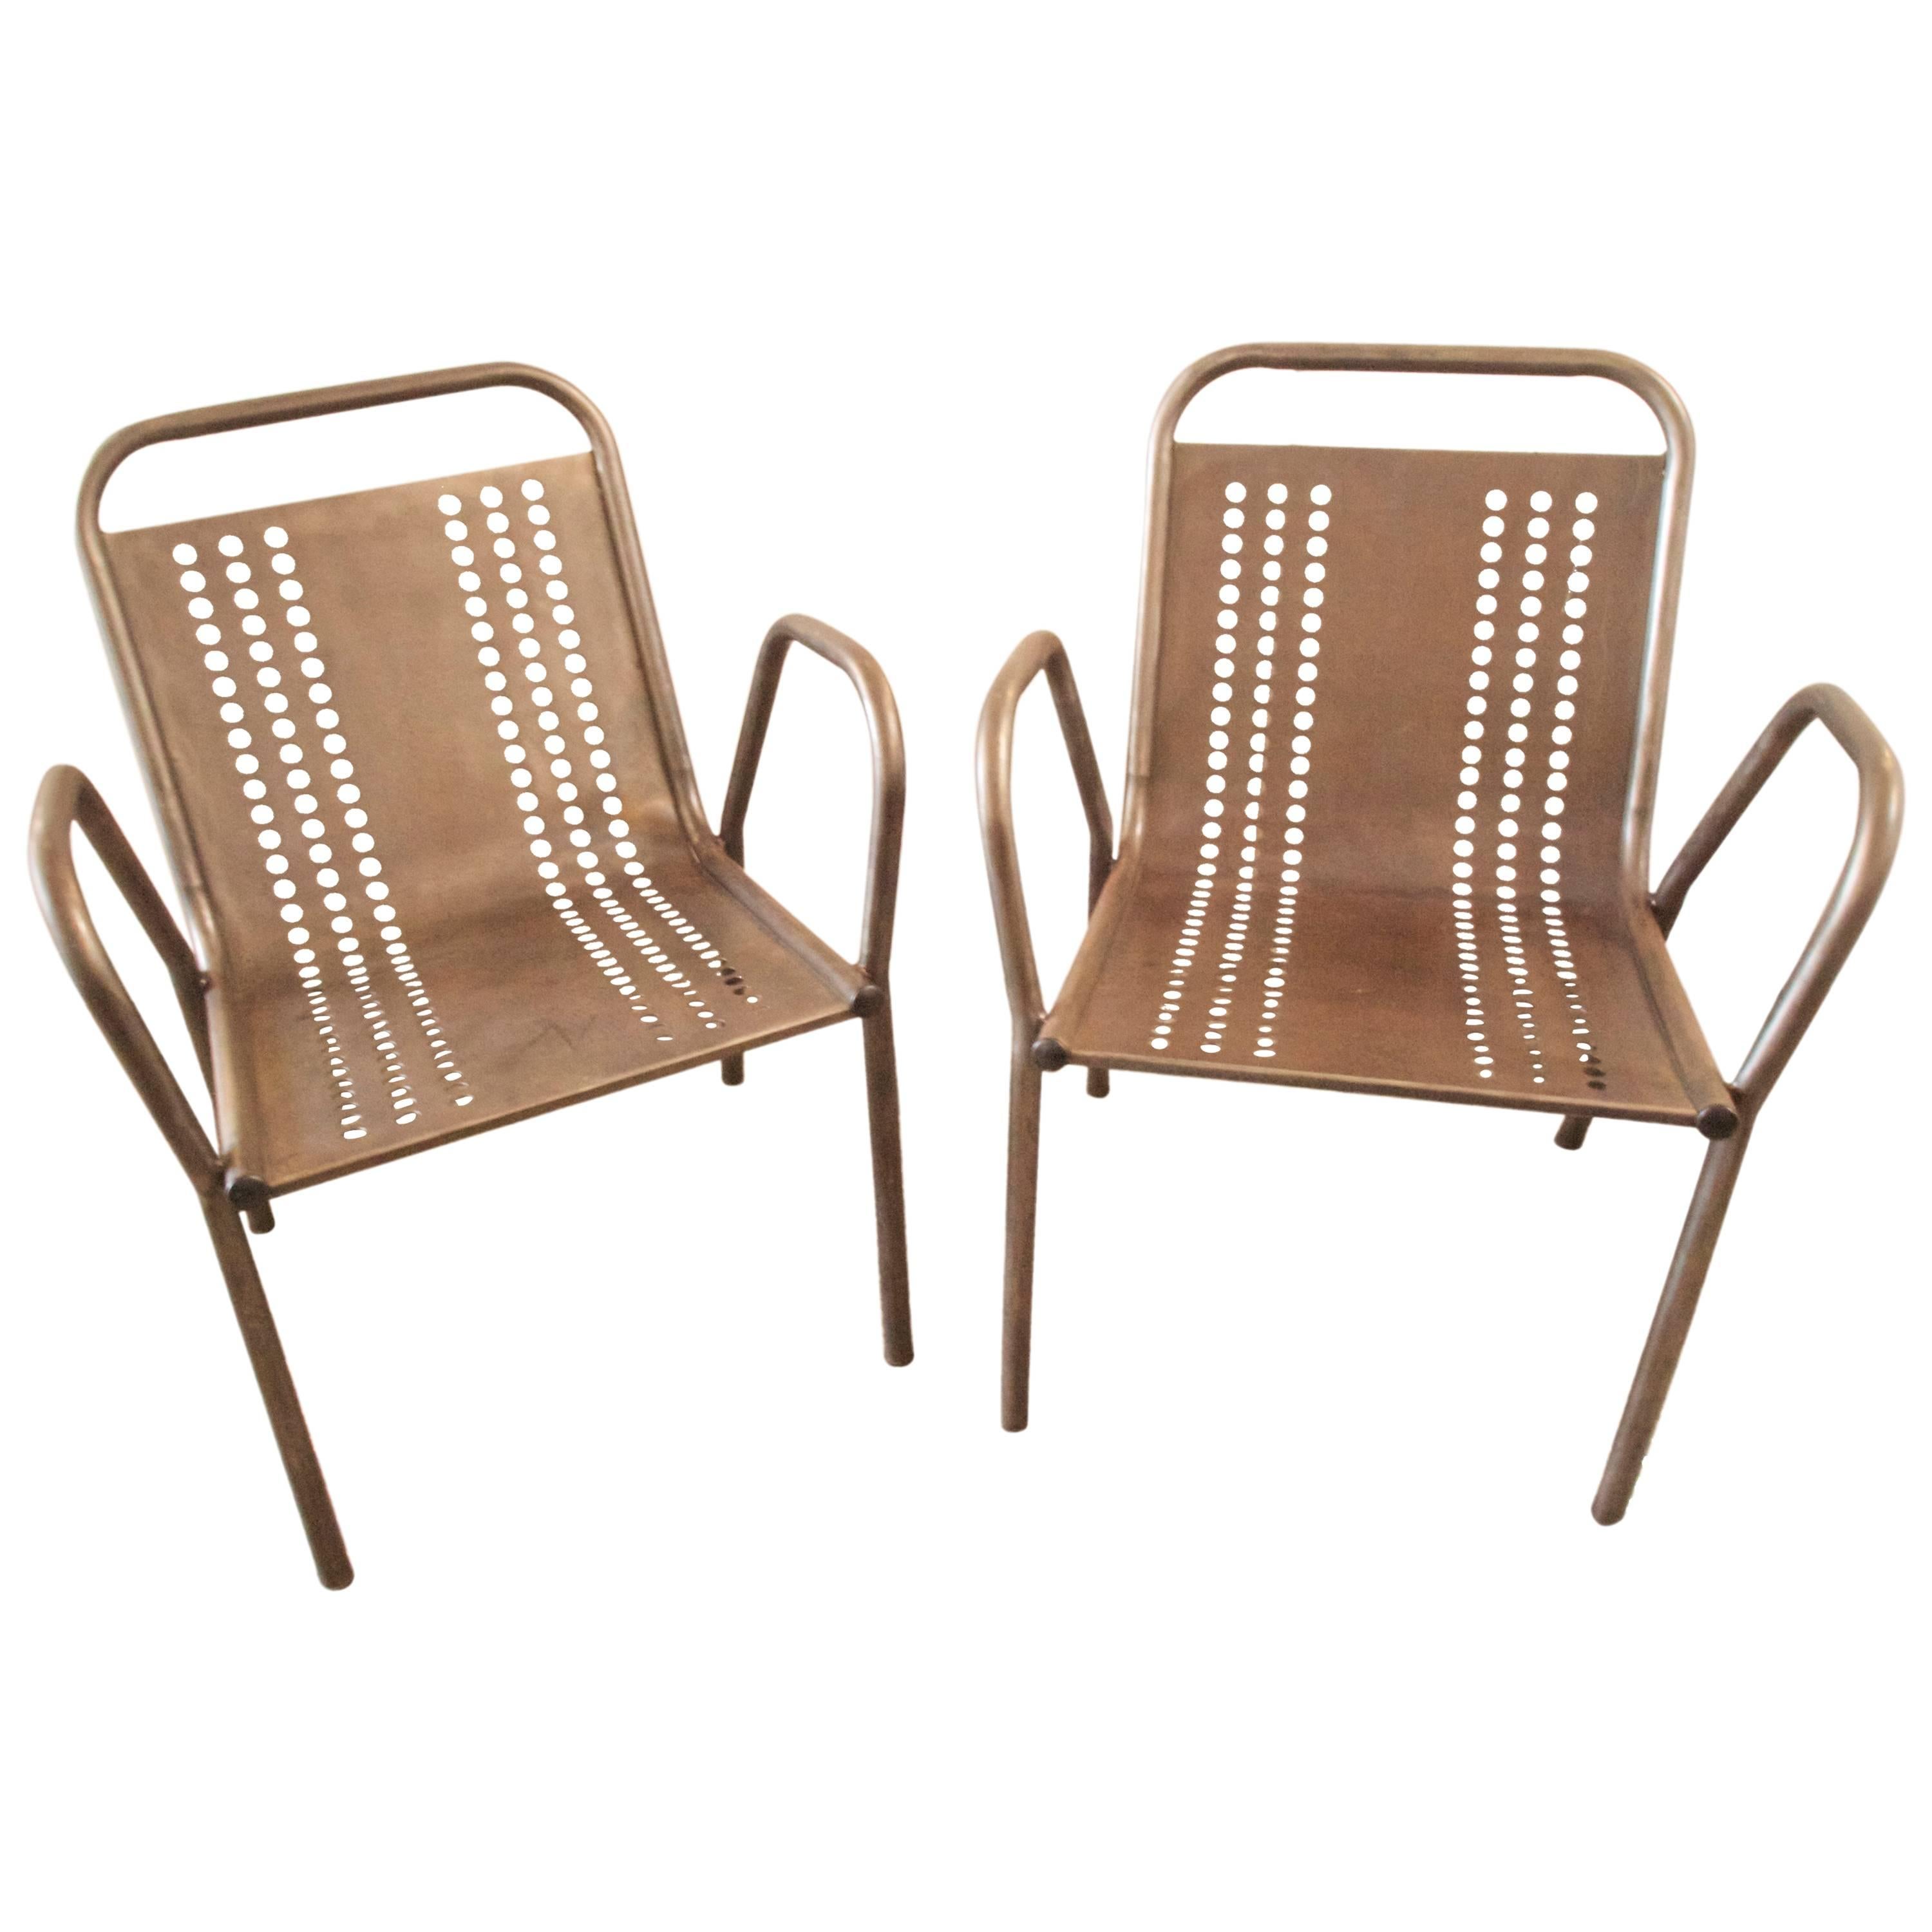 Pair of French Industrial Steel Lounge Chairs